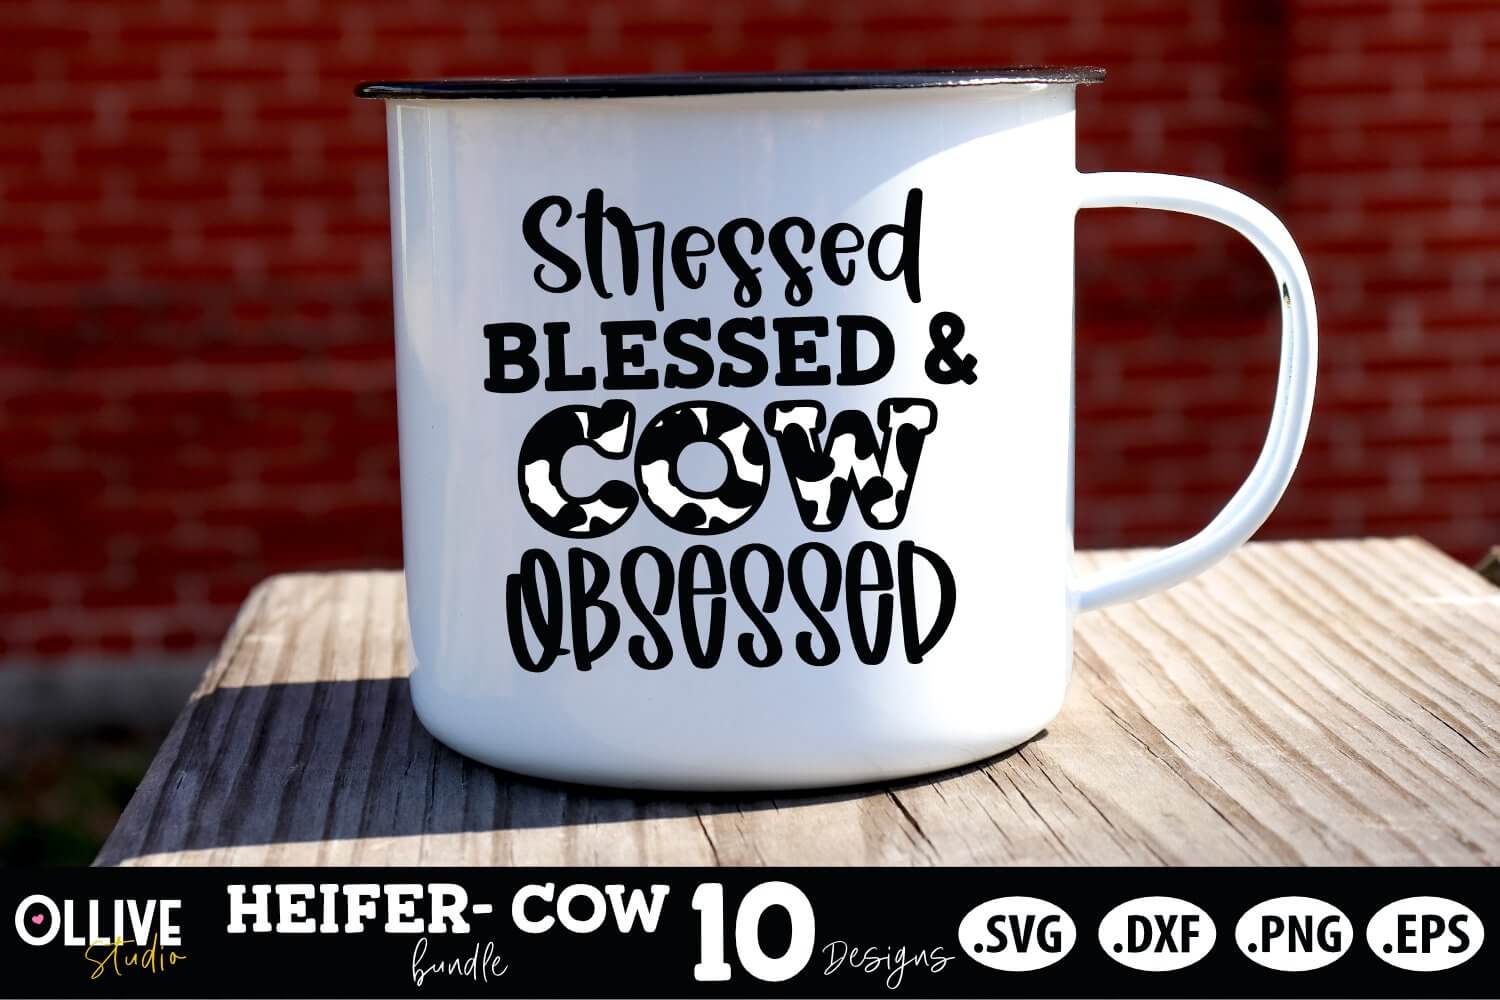 Smessed blessed and cow obsessed.